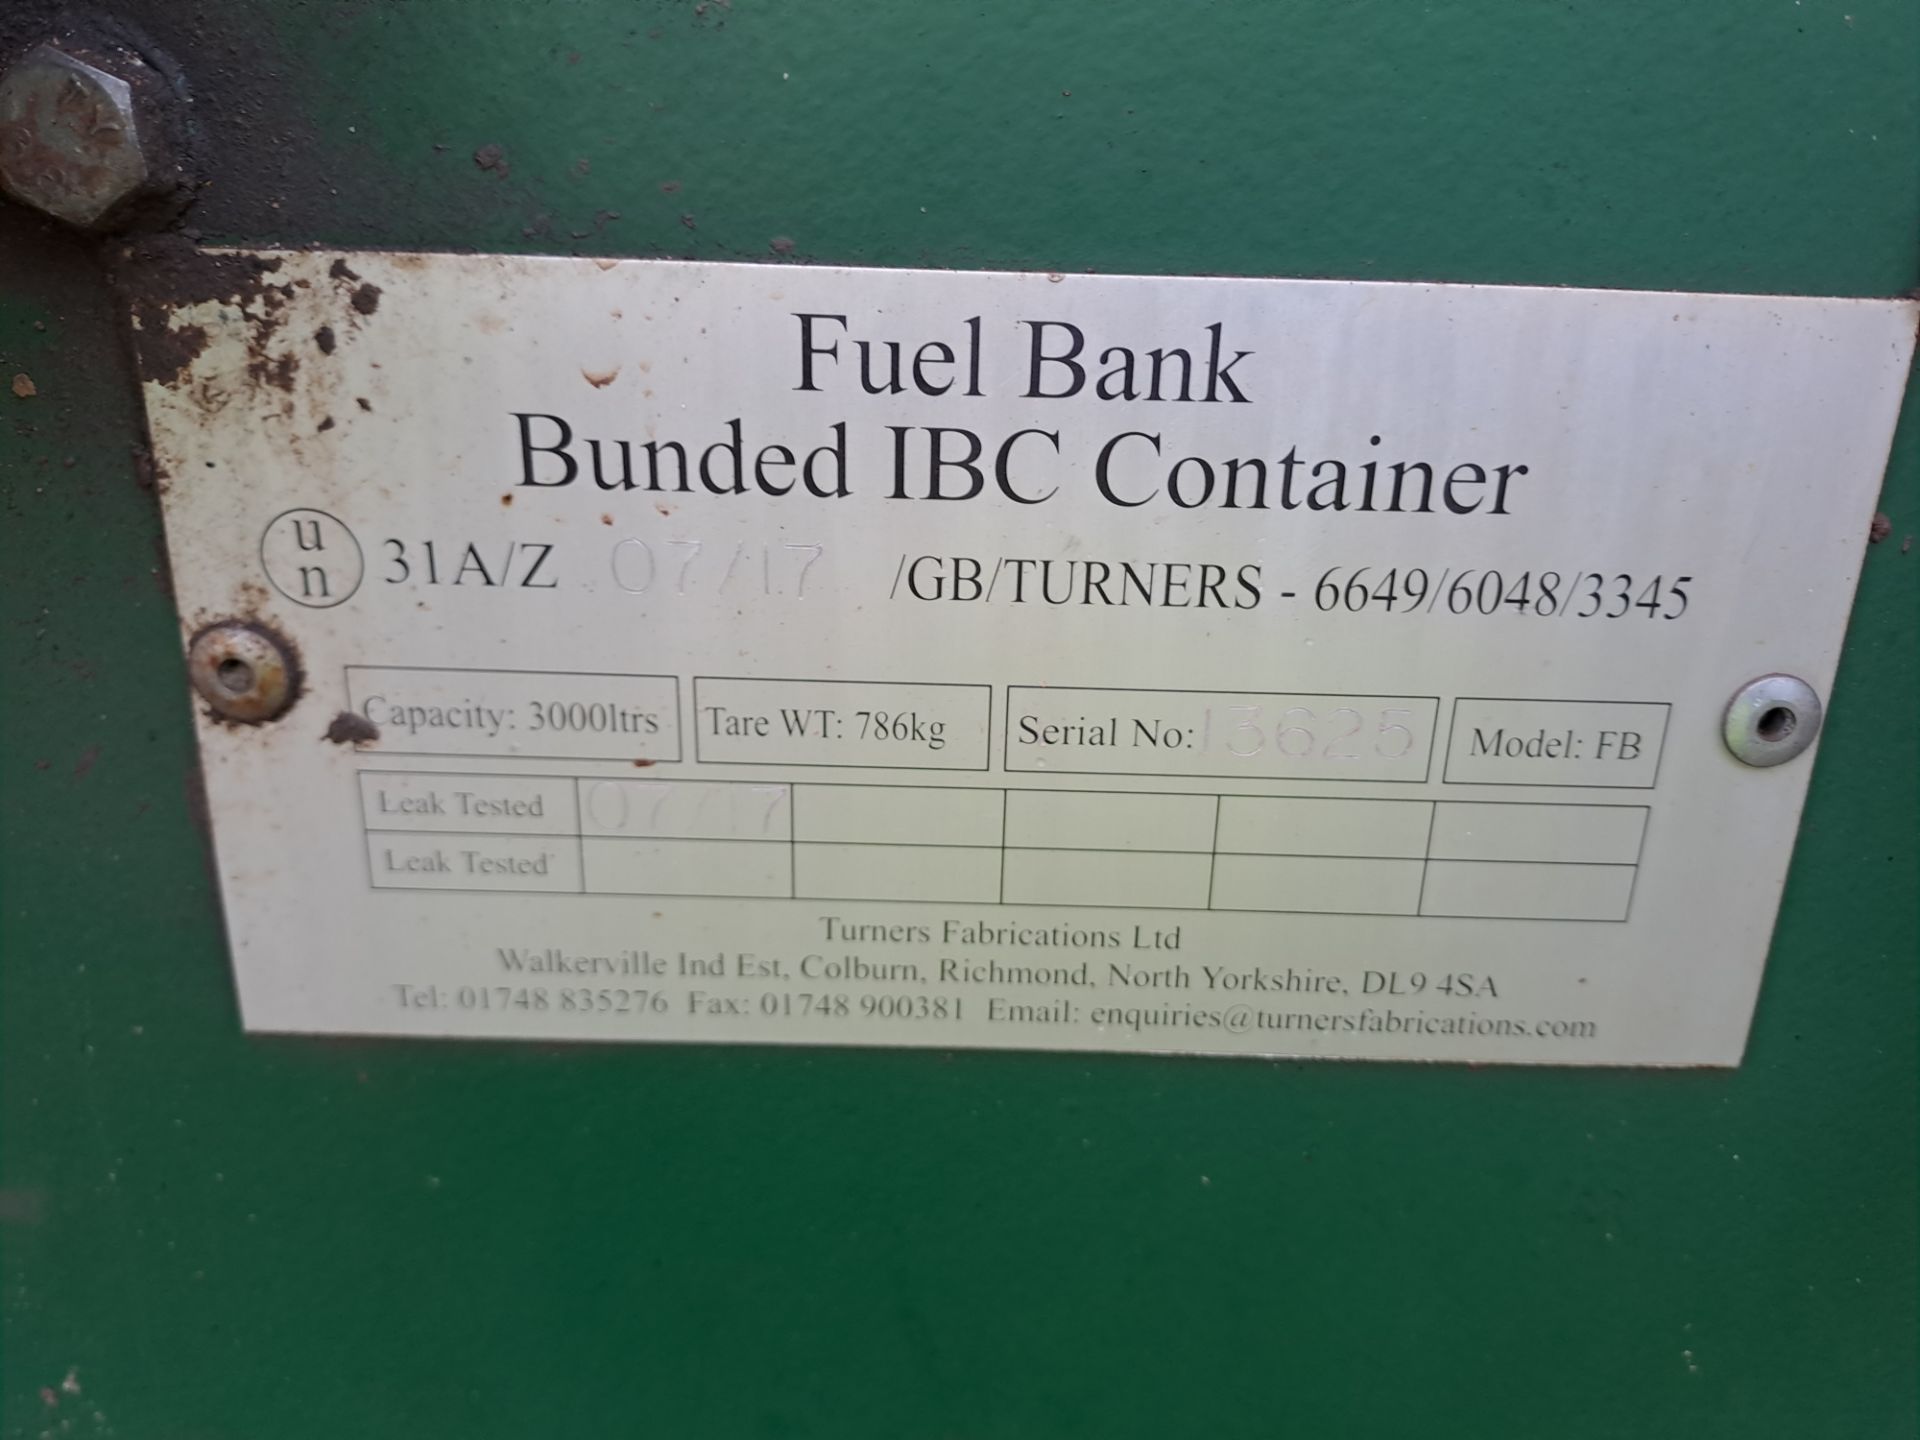 Fuel Bank bunded IBC skid mounted container, serial no. 13625, capacity 3000 ltrs, with pump & hose - Image 3 of 6